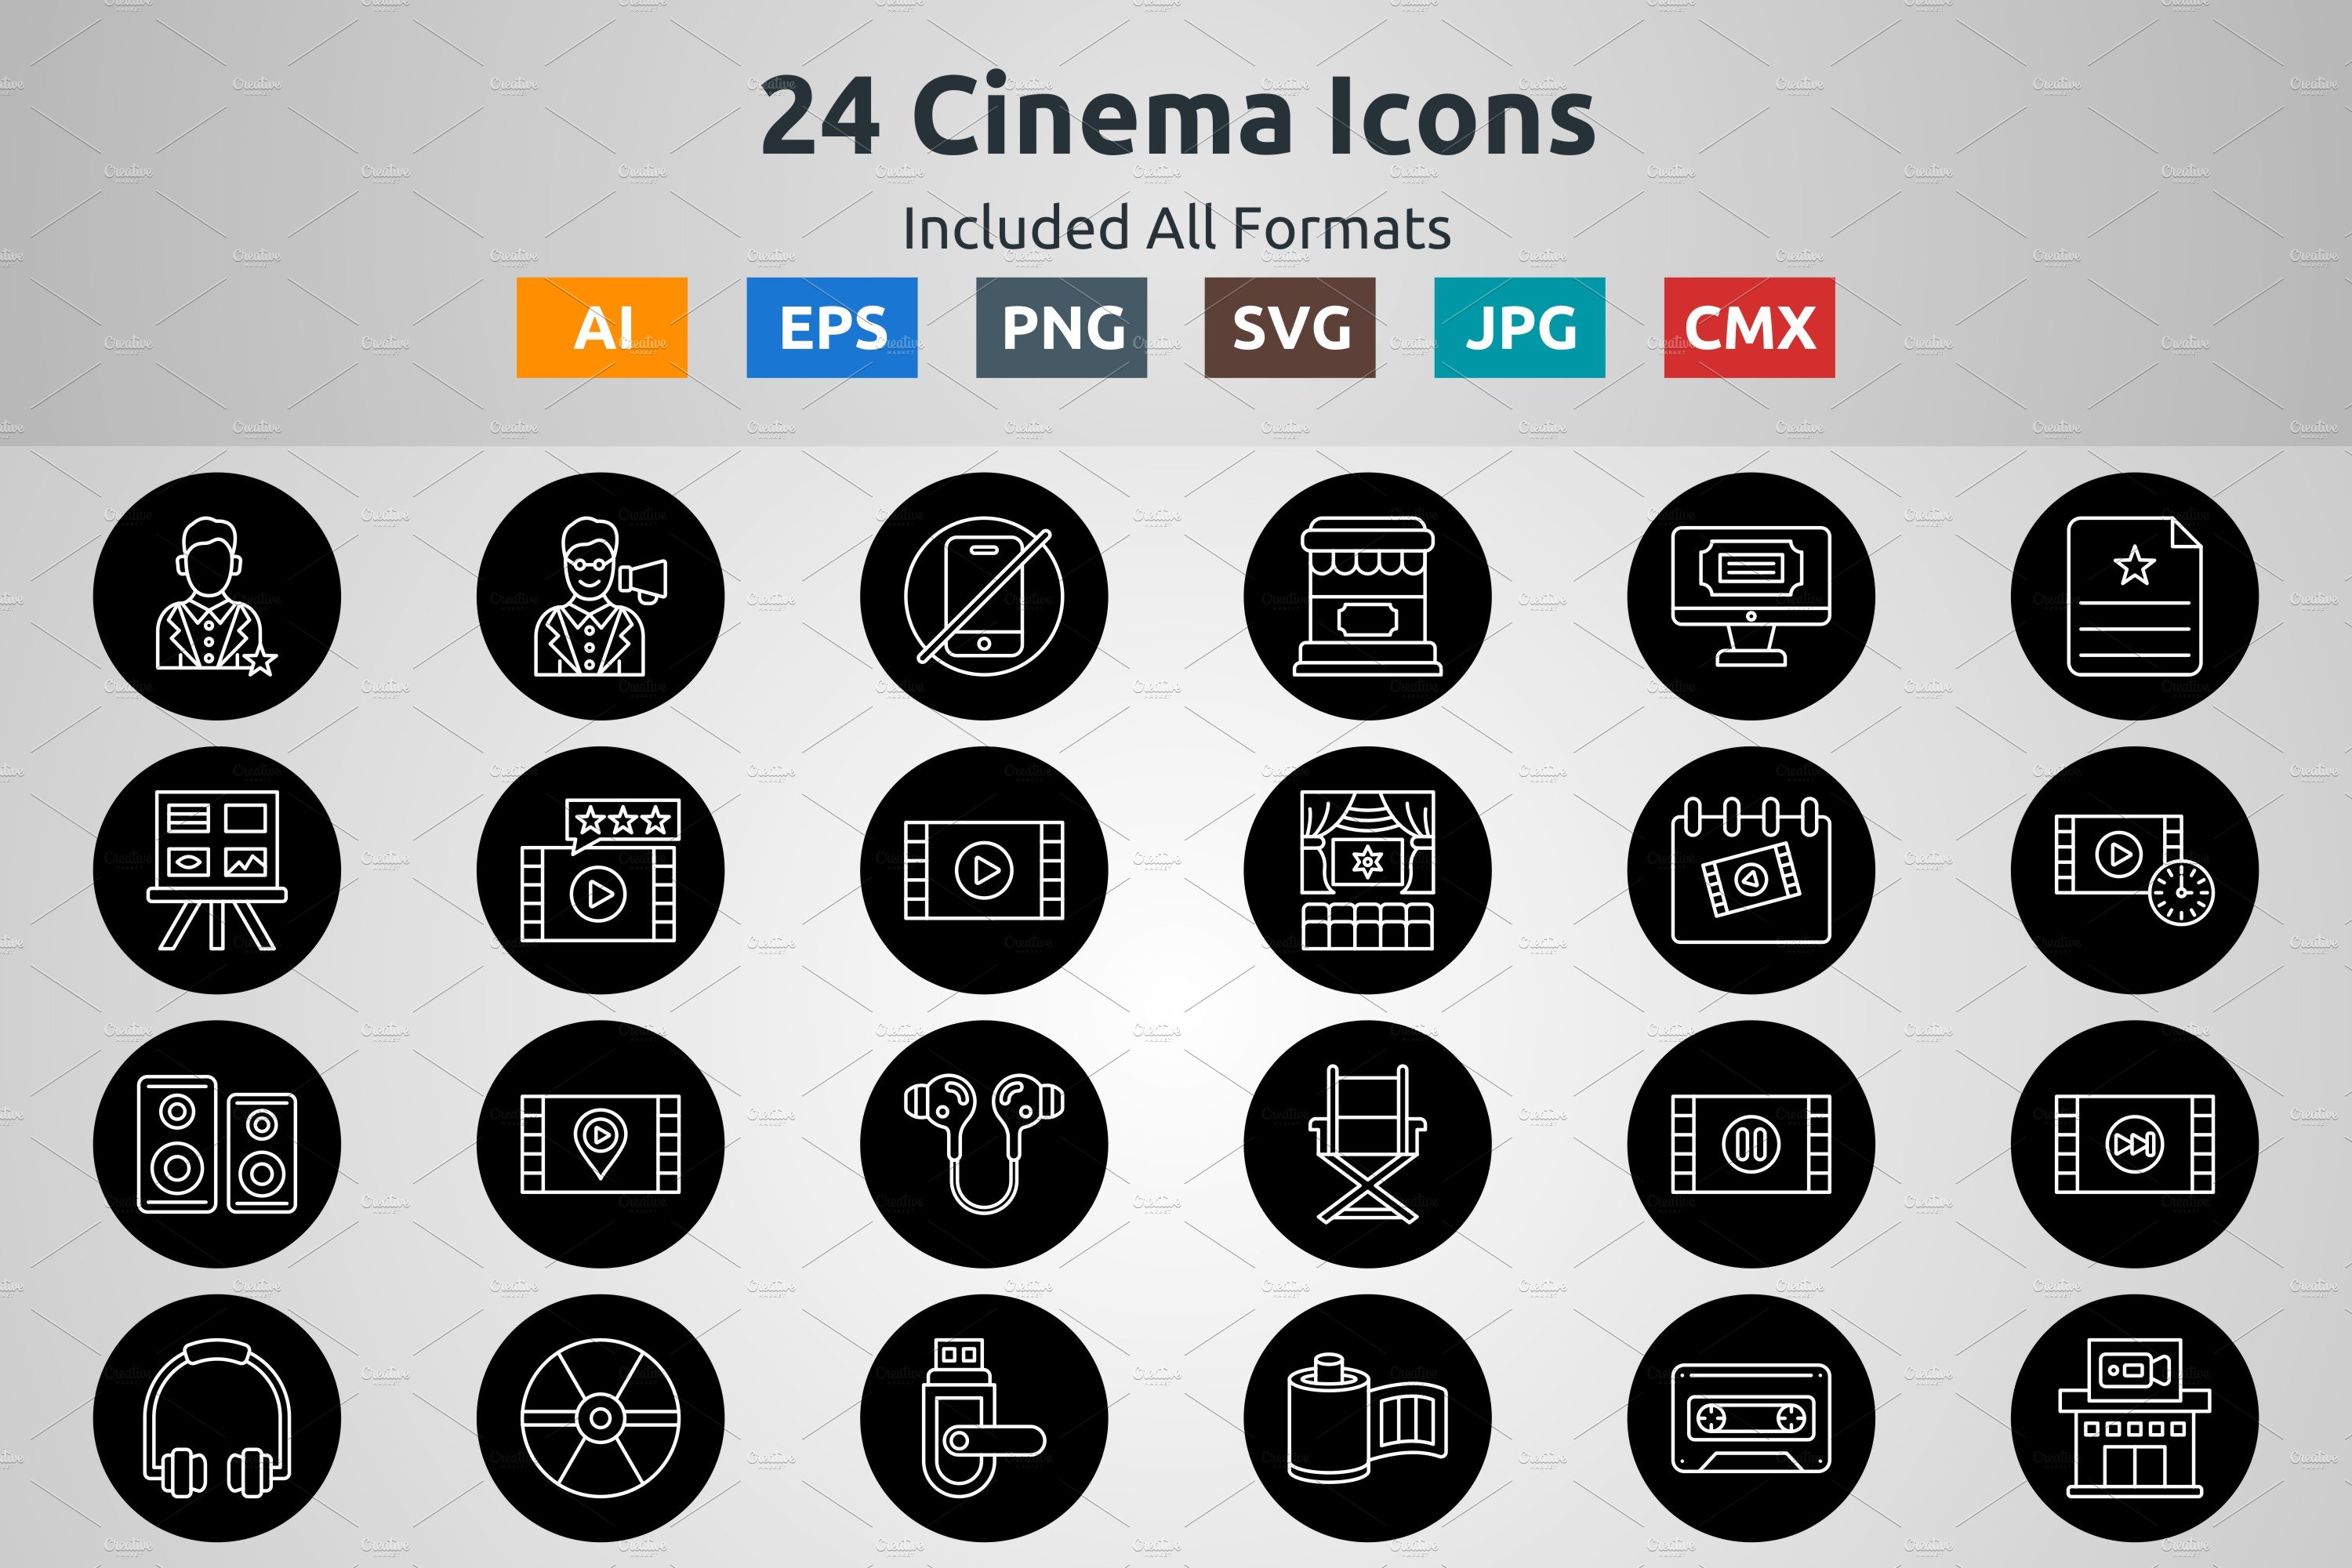 Line Circle Inverted Cinema Icons cover image.